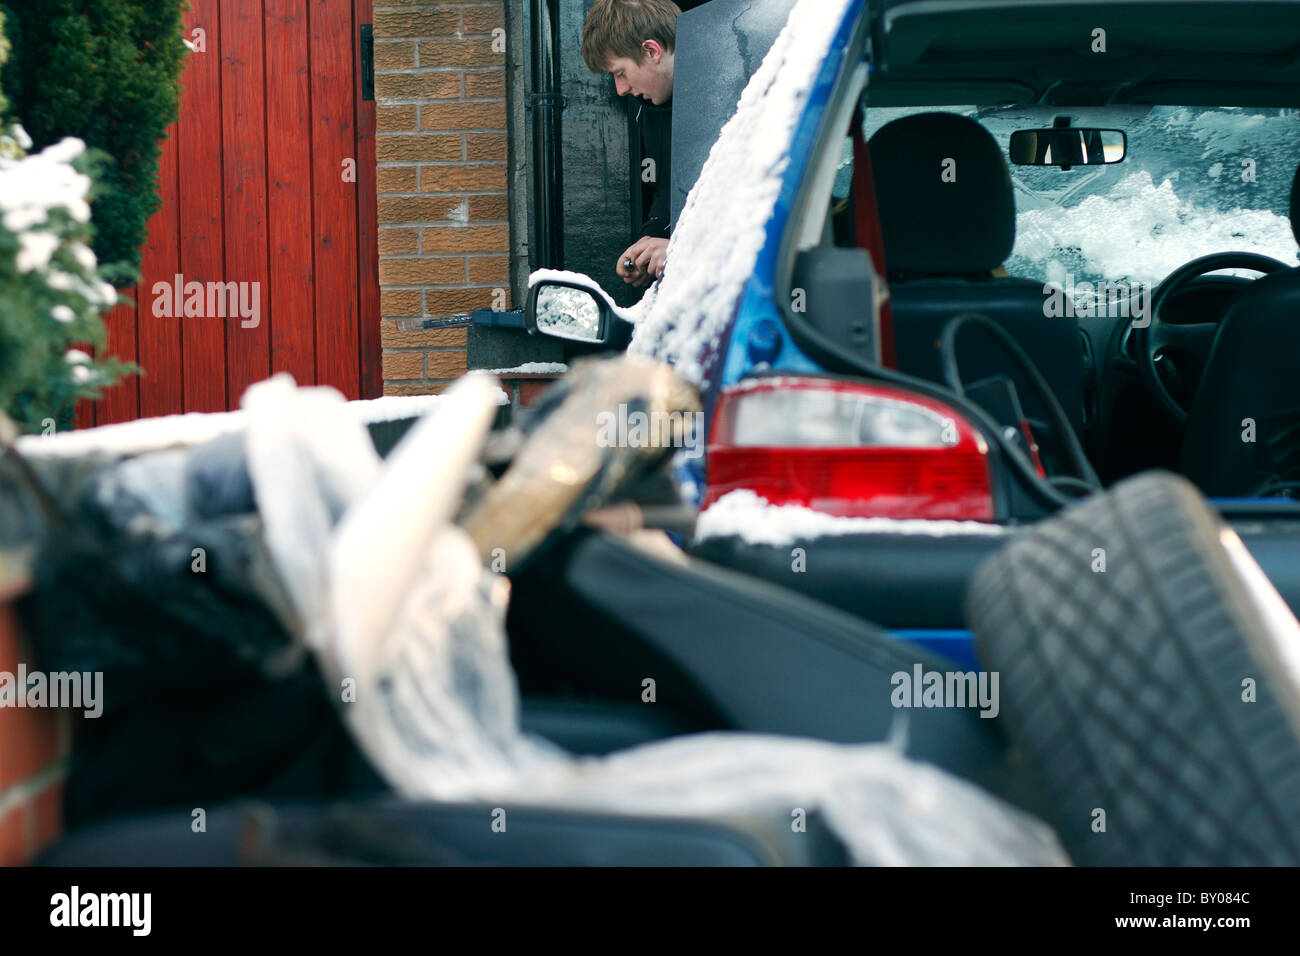 A young man clearing out the boot of his car to carry out some work on the interior. Stock Photo